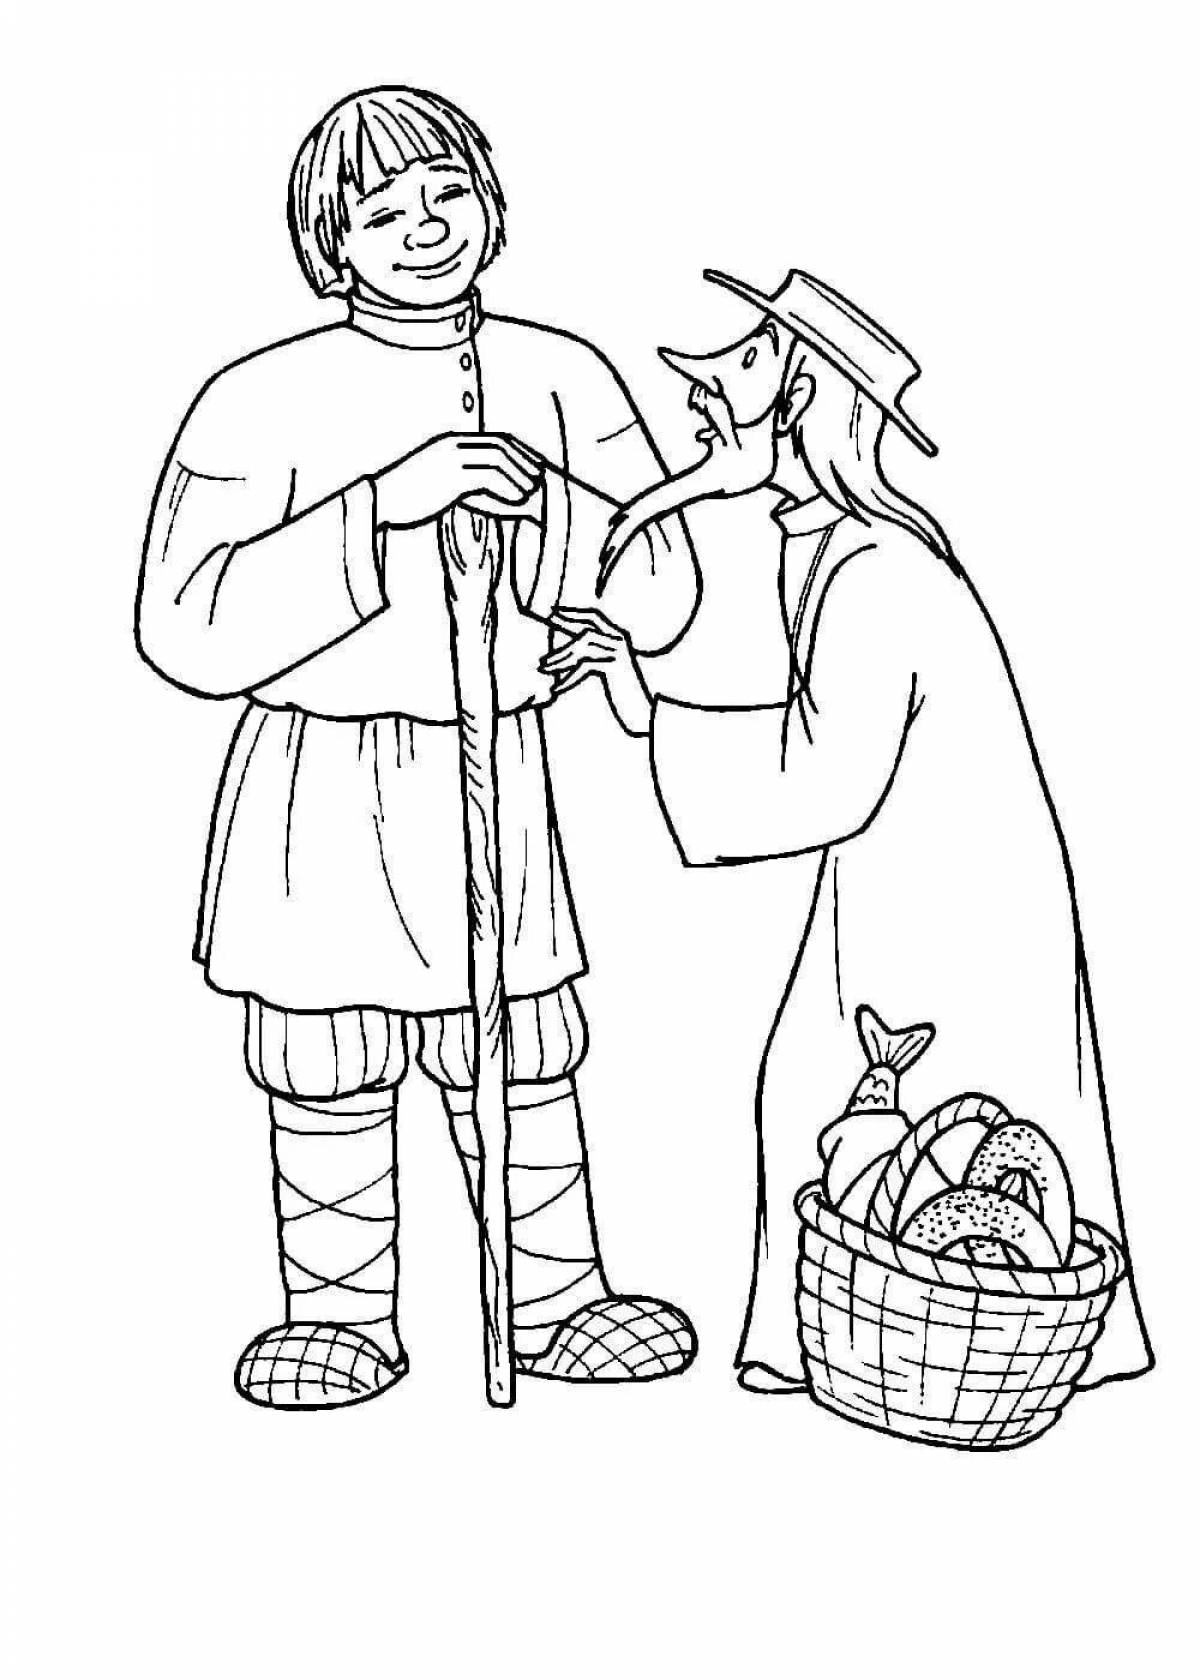 Shining story coloring page